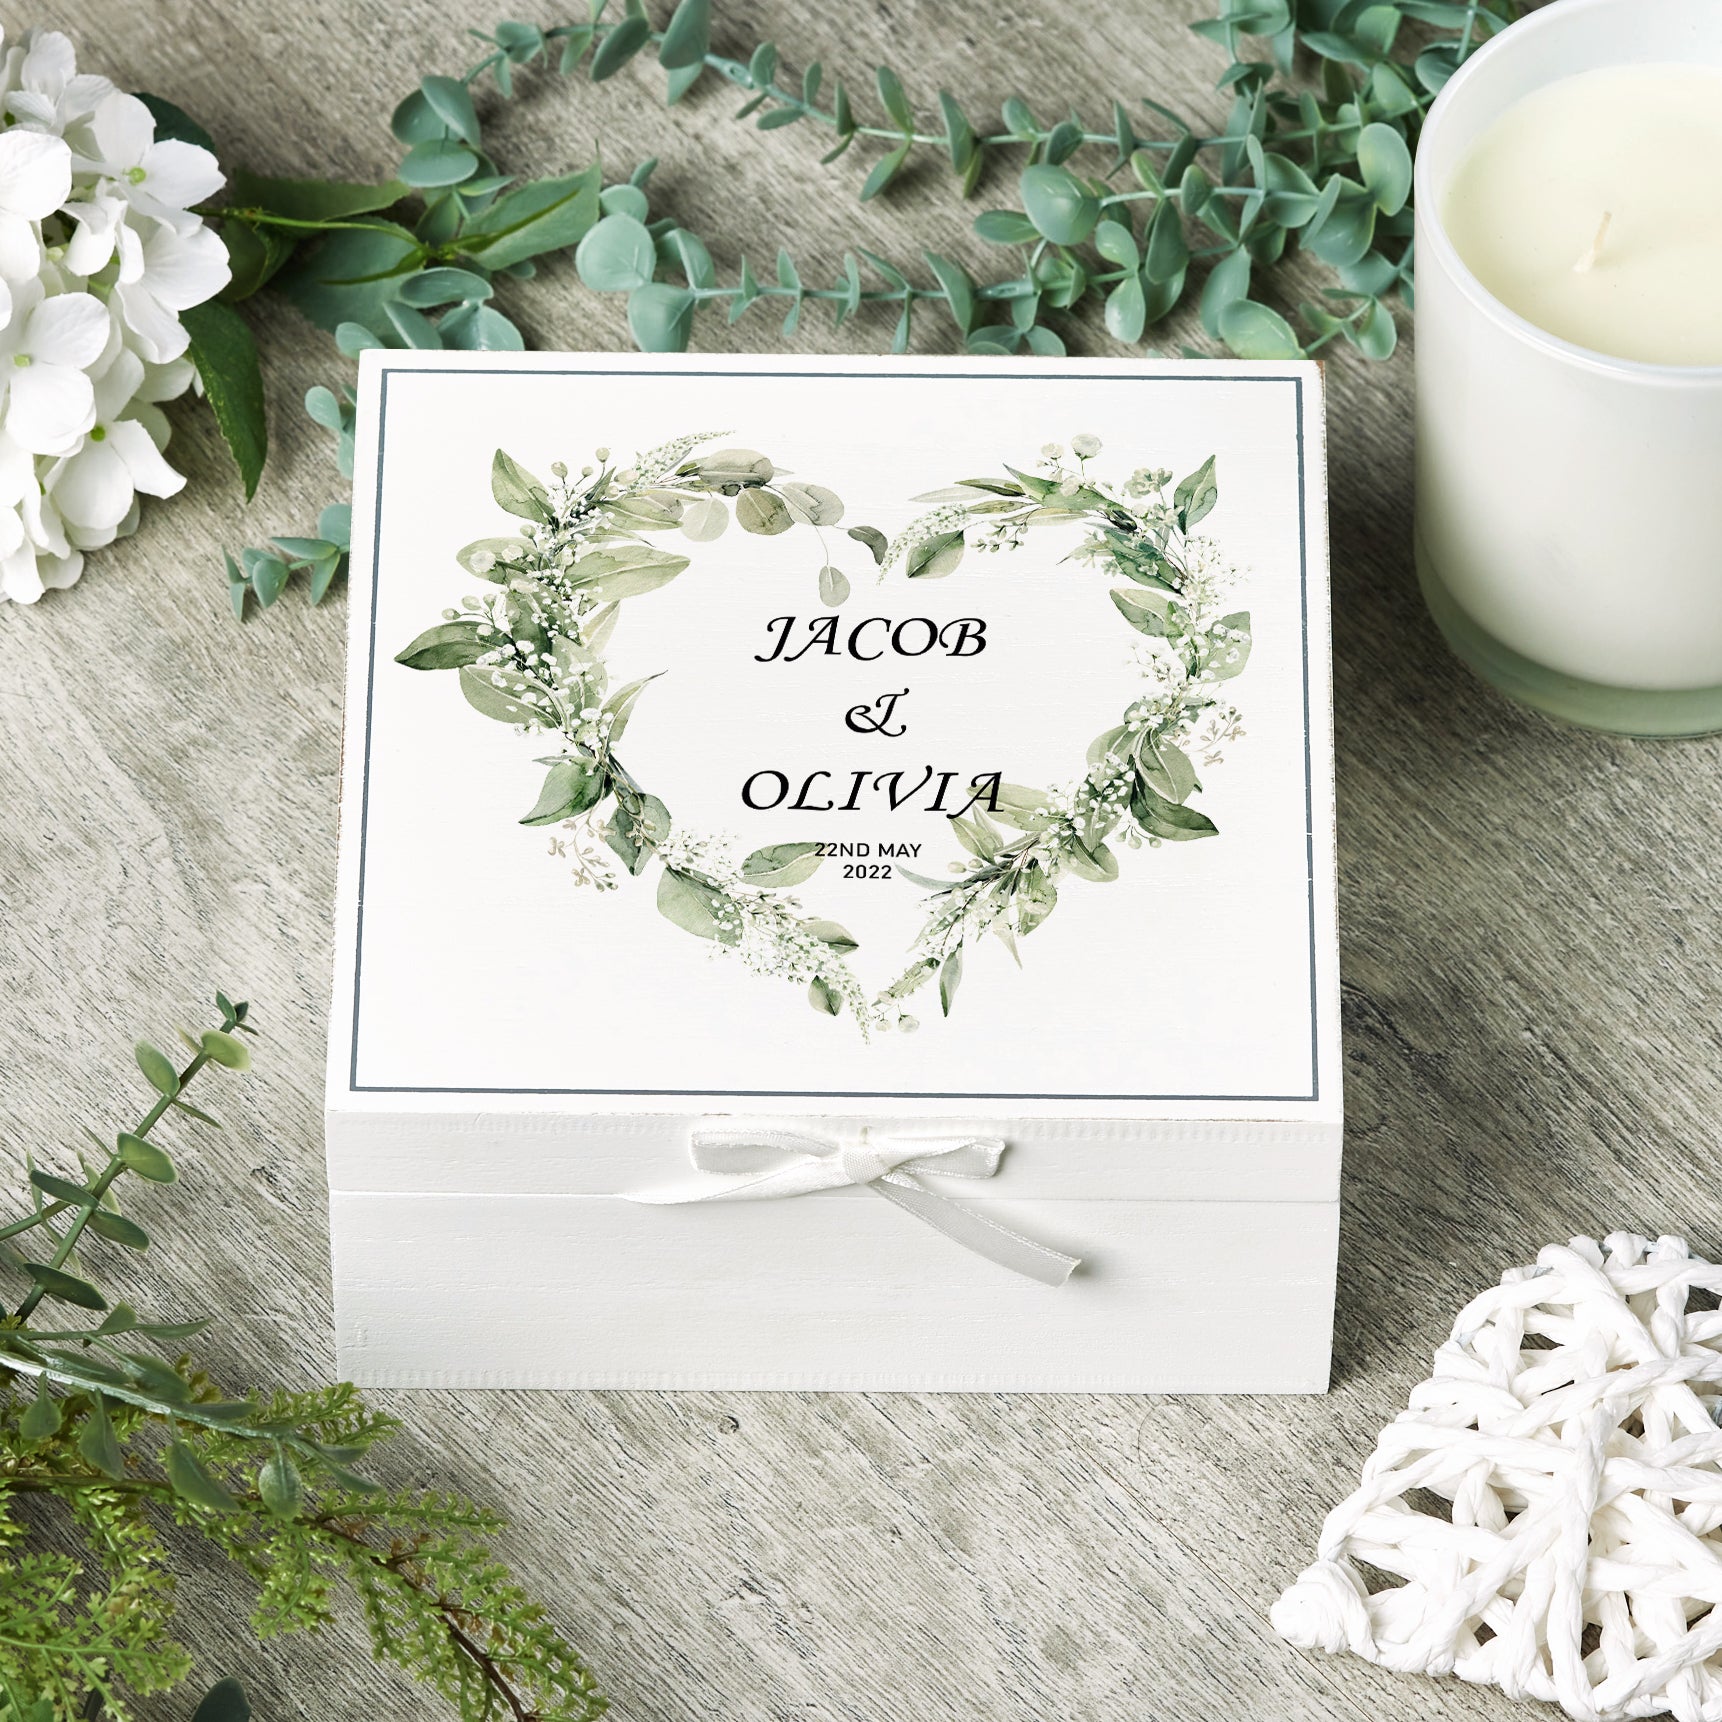 Personalised Wedding Day Vintage Wooden Keepsake Box Gift With Floral Wreath Heart Print